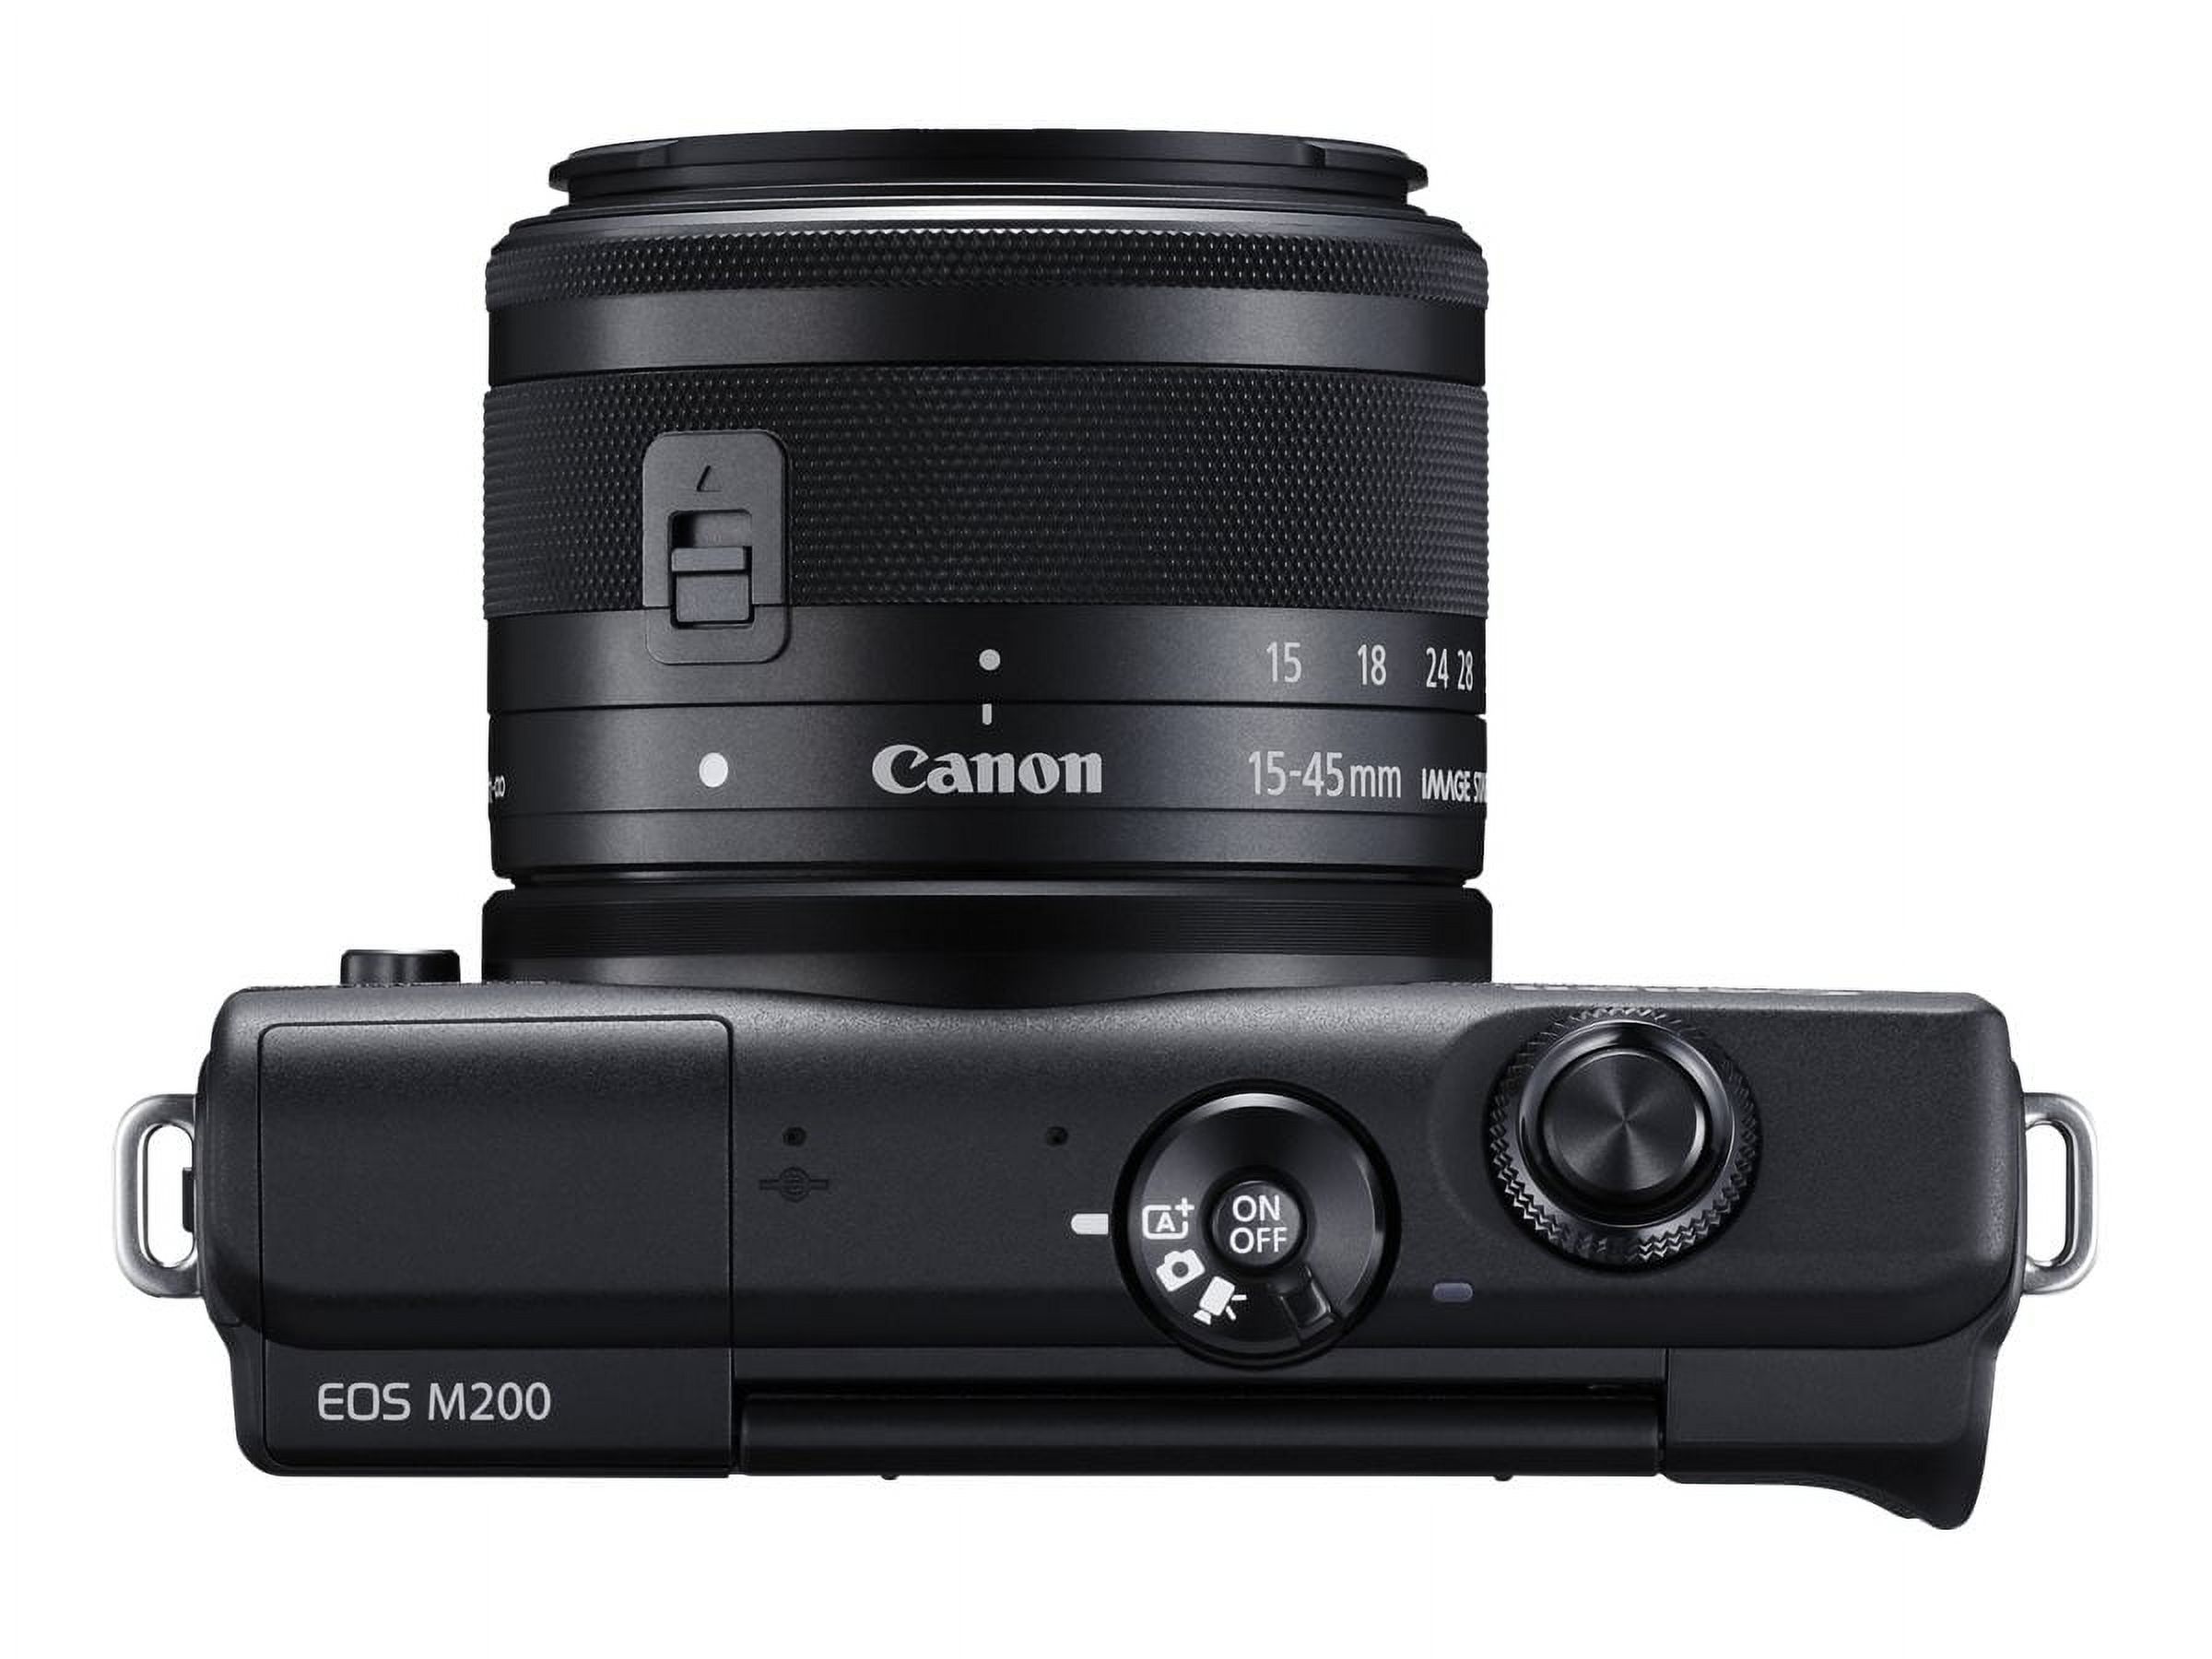 Canon EOS M200 - Digital camera - mirrorless - 24.1 MP - APS-C - 4K / 25 fps - 3x optical zoom EF-M 15-45mm IS STM lens - Wi-Fi, Bluetooth - black - image 3 of 3